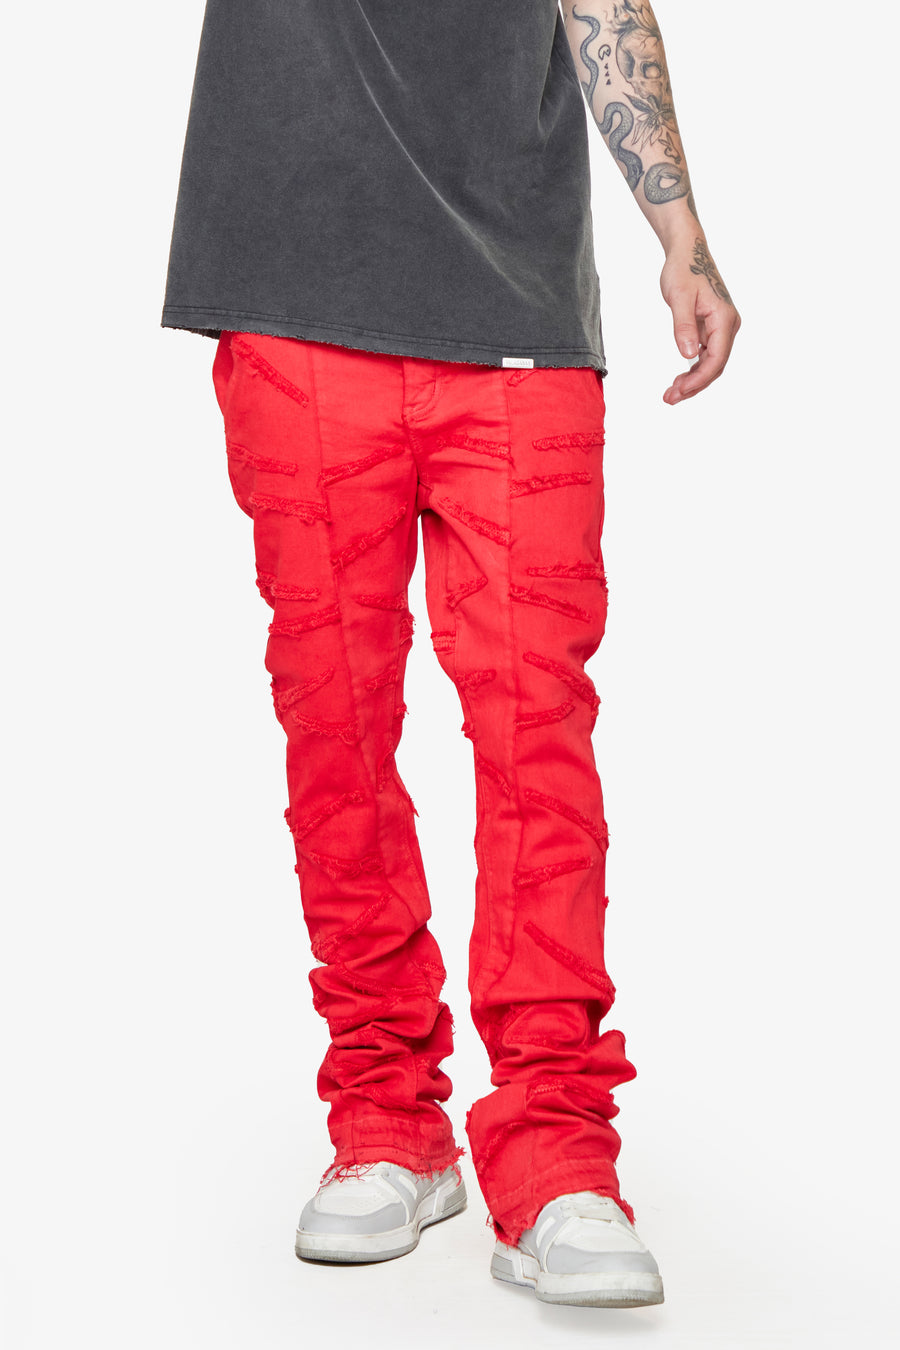 ‚ÄúSABER‚Äù RED WASHED STACKED FLARE JEAN